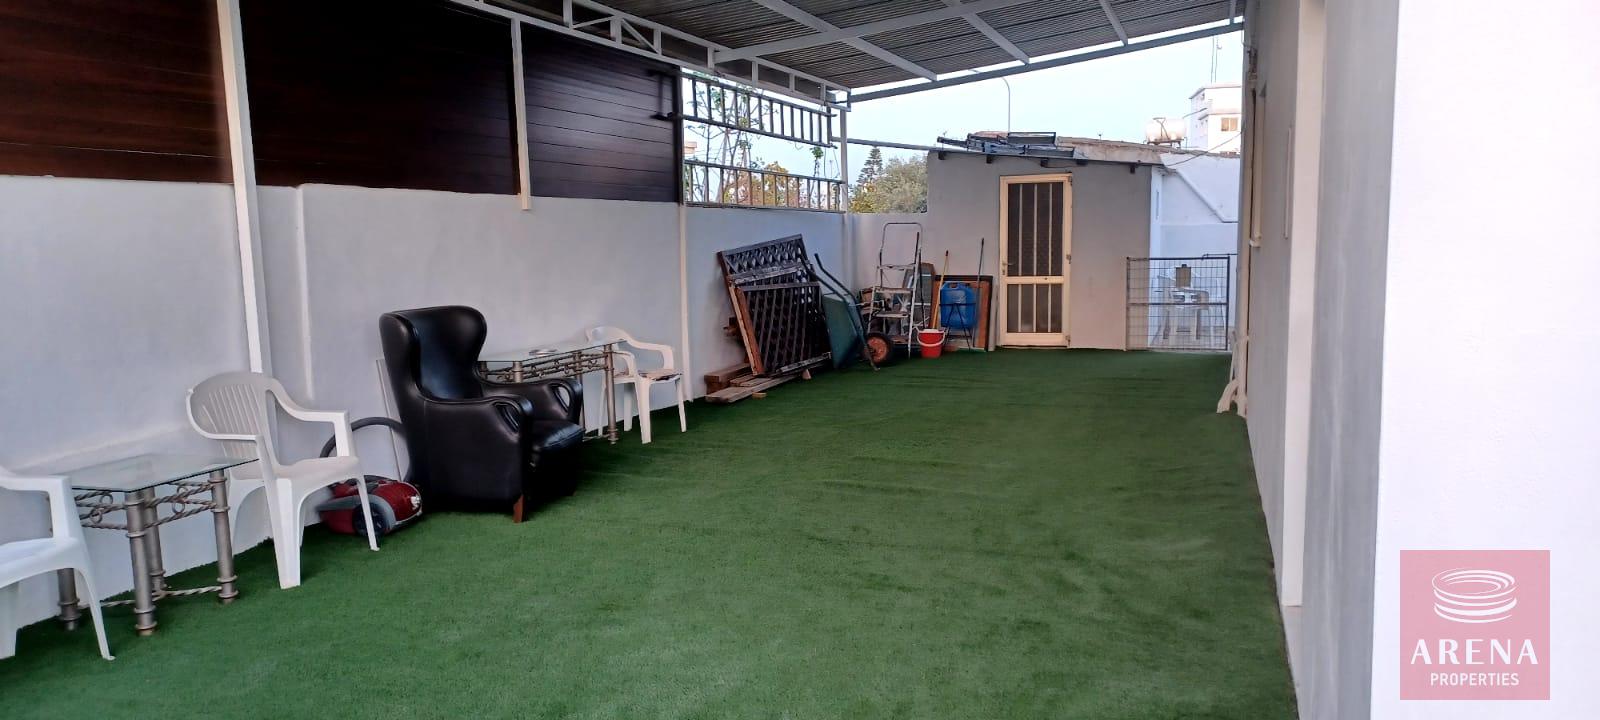 2 bed bungalow in derynia for sale